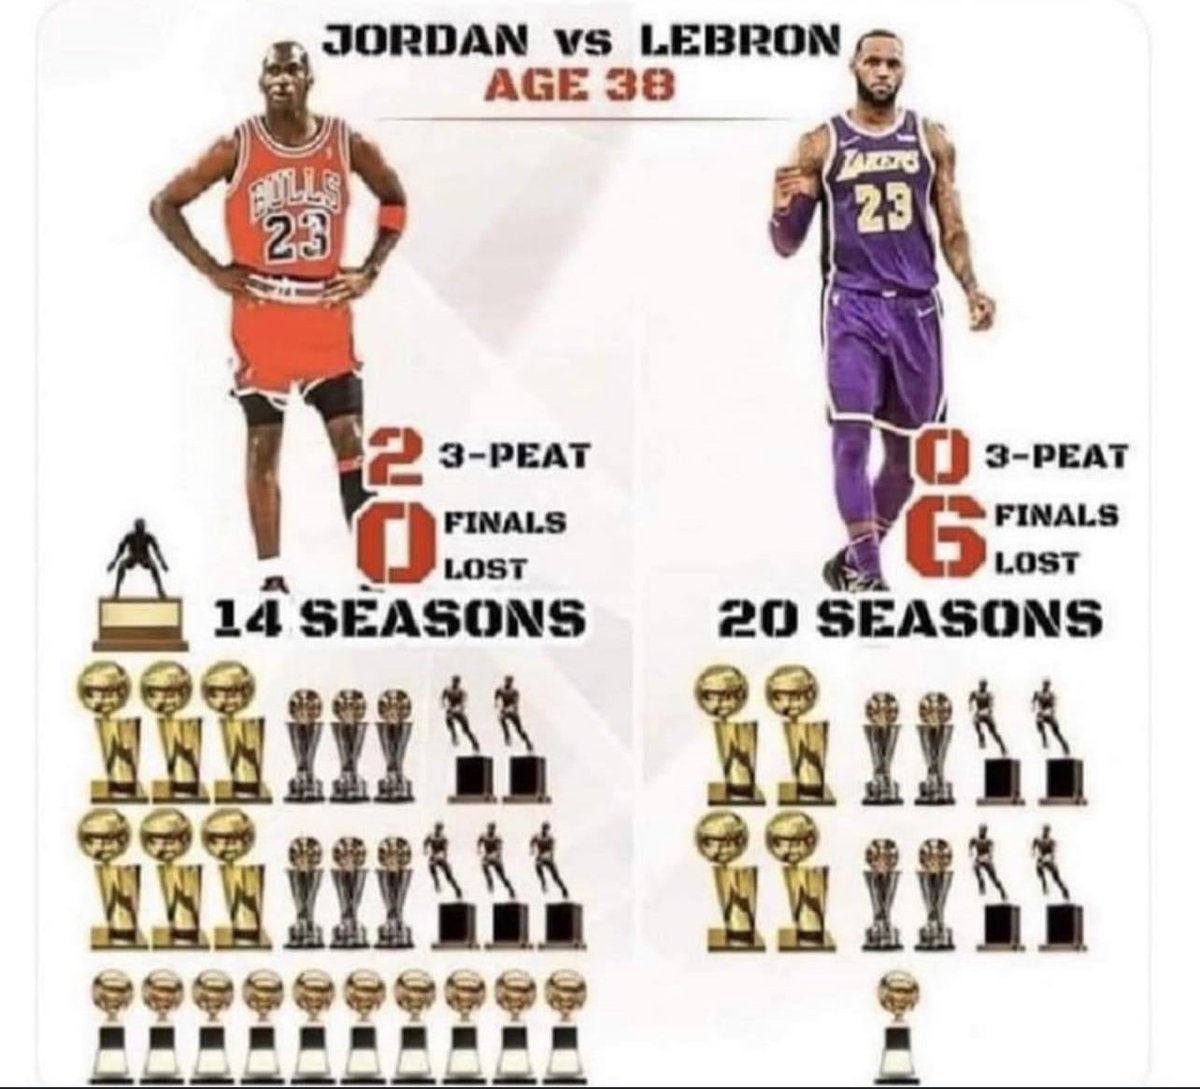 Michael Jordan did MORE than LeBron in LESS time and with LESS help.